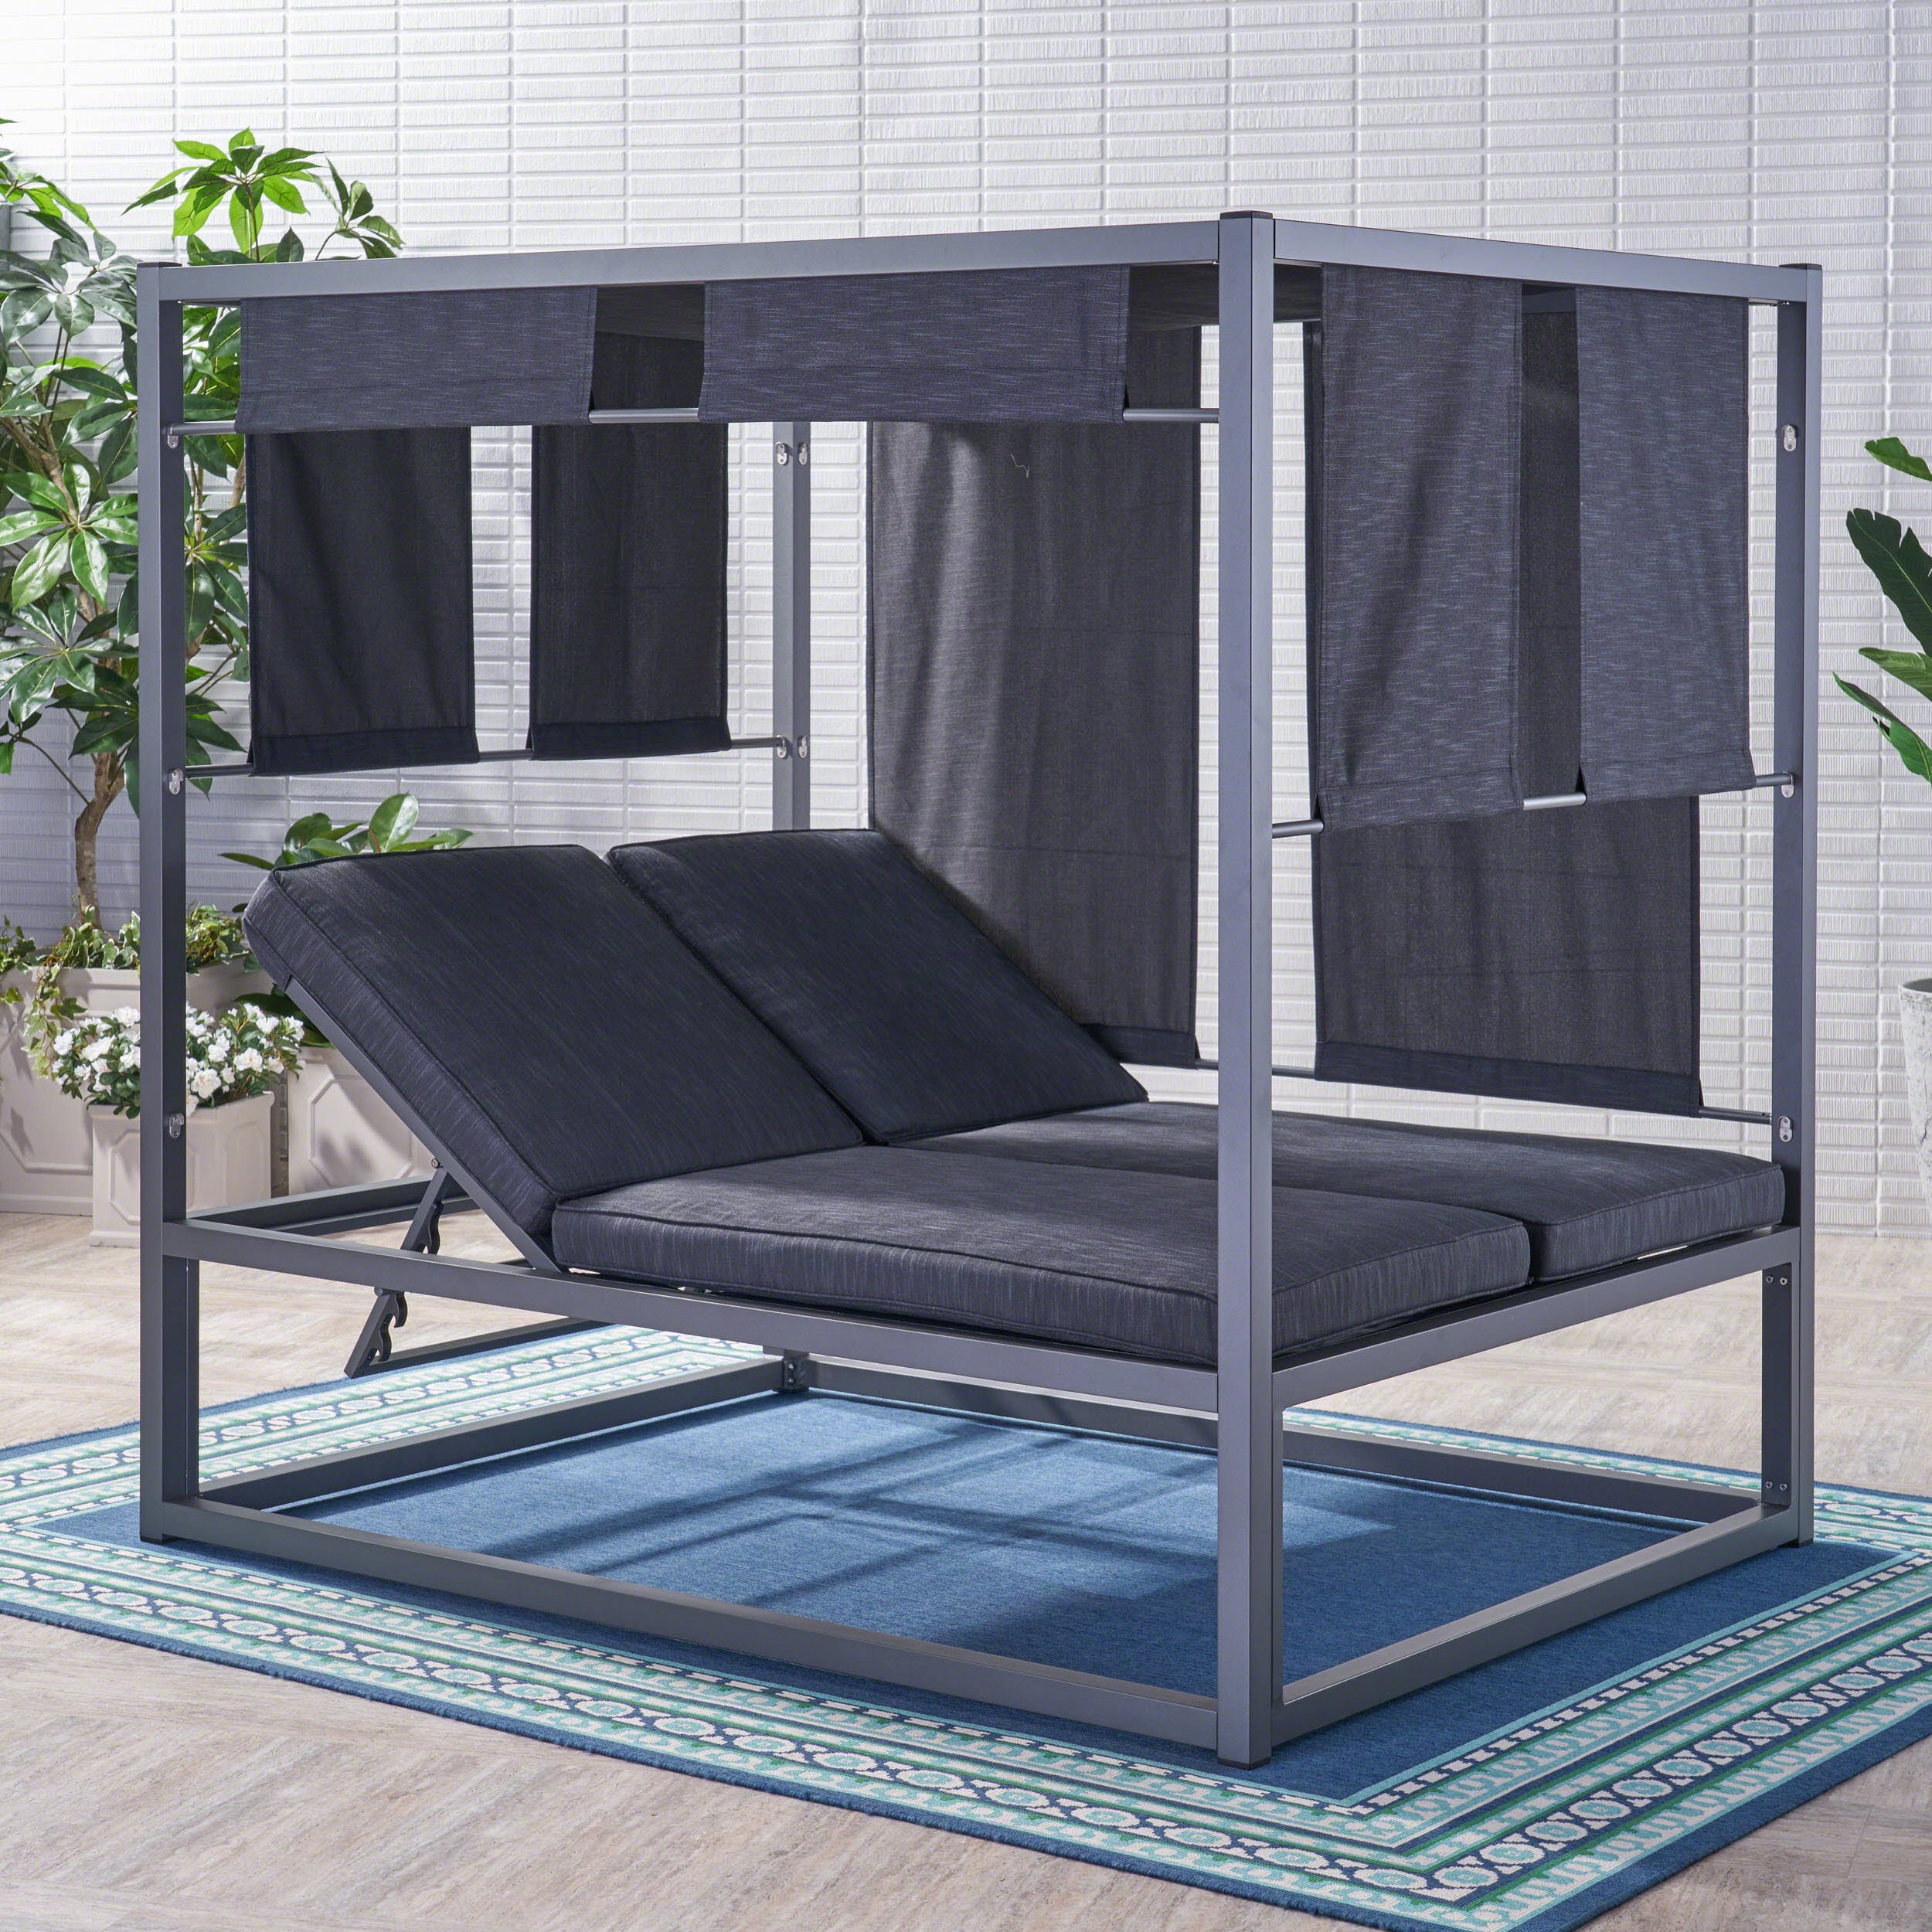 Chad Outdoor Aluminum Daybed with Canopy, Dark Grey, Grey ...